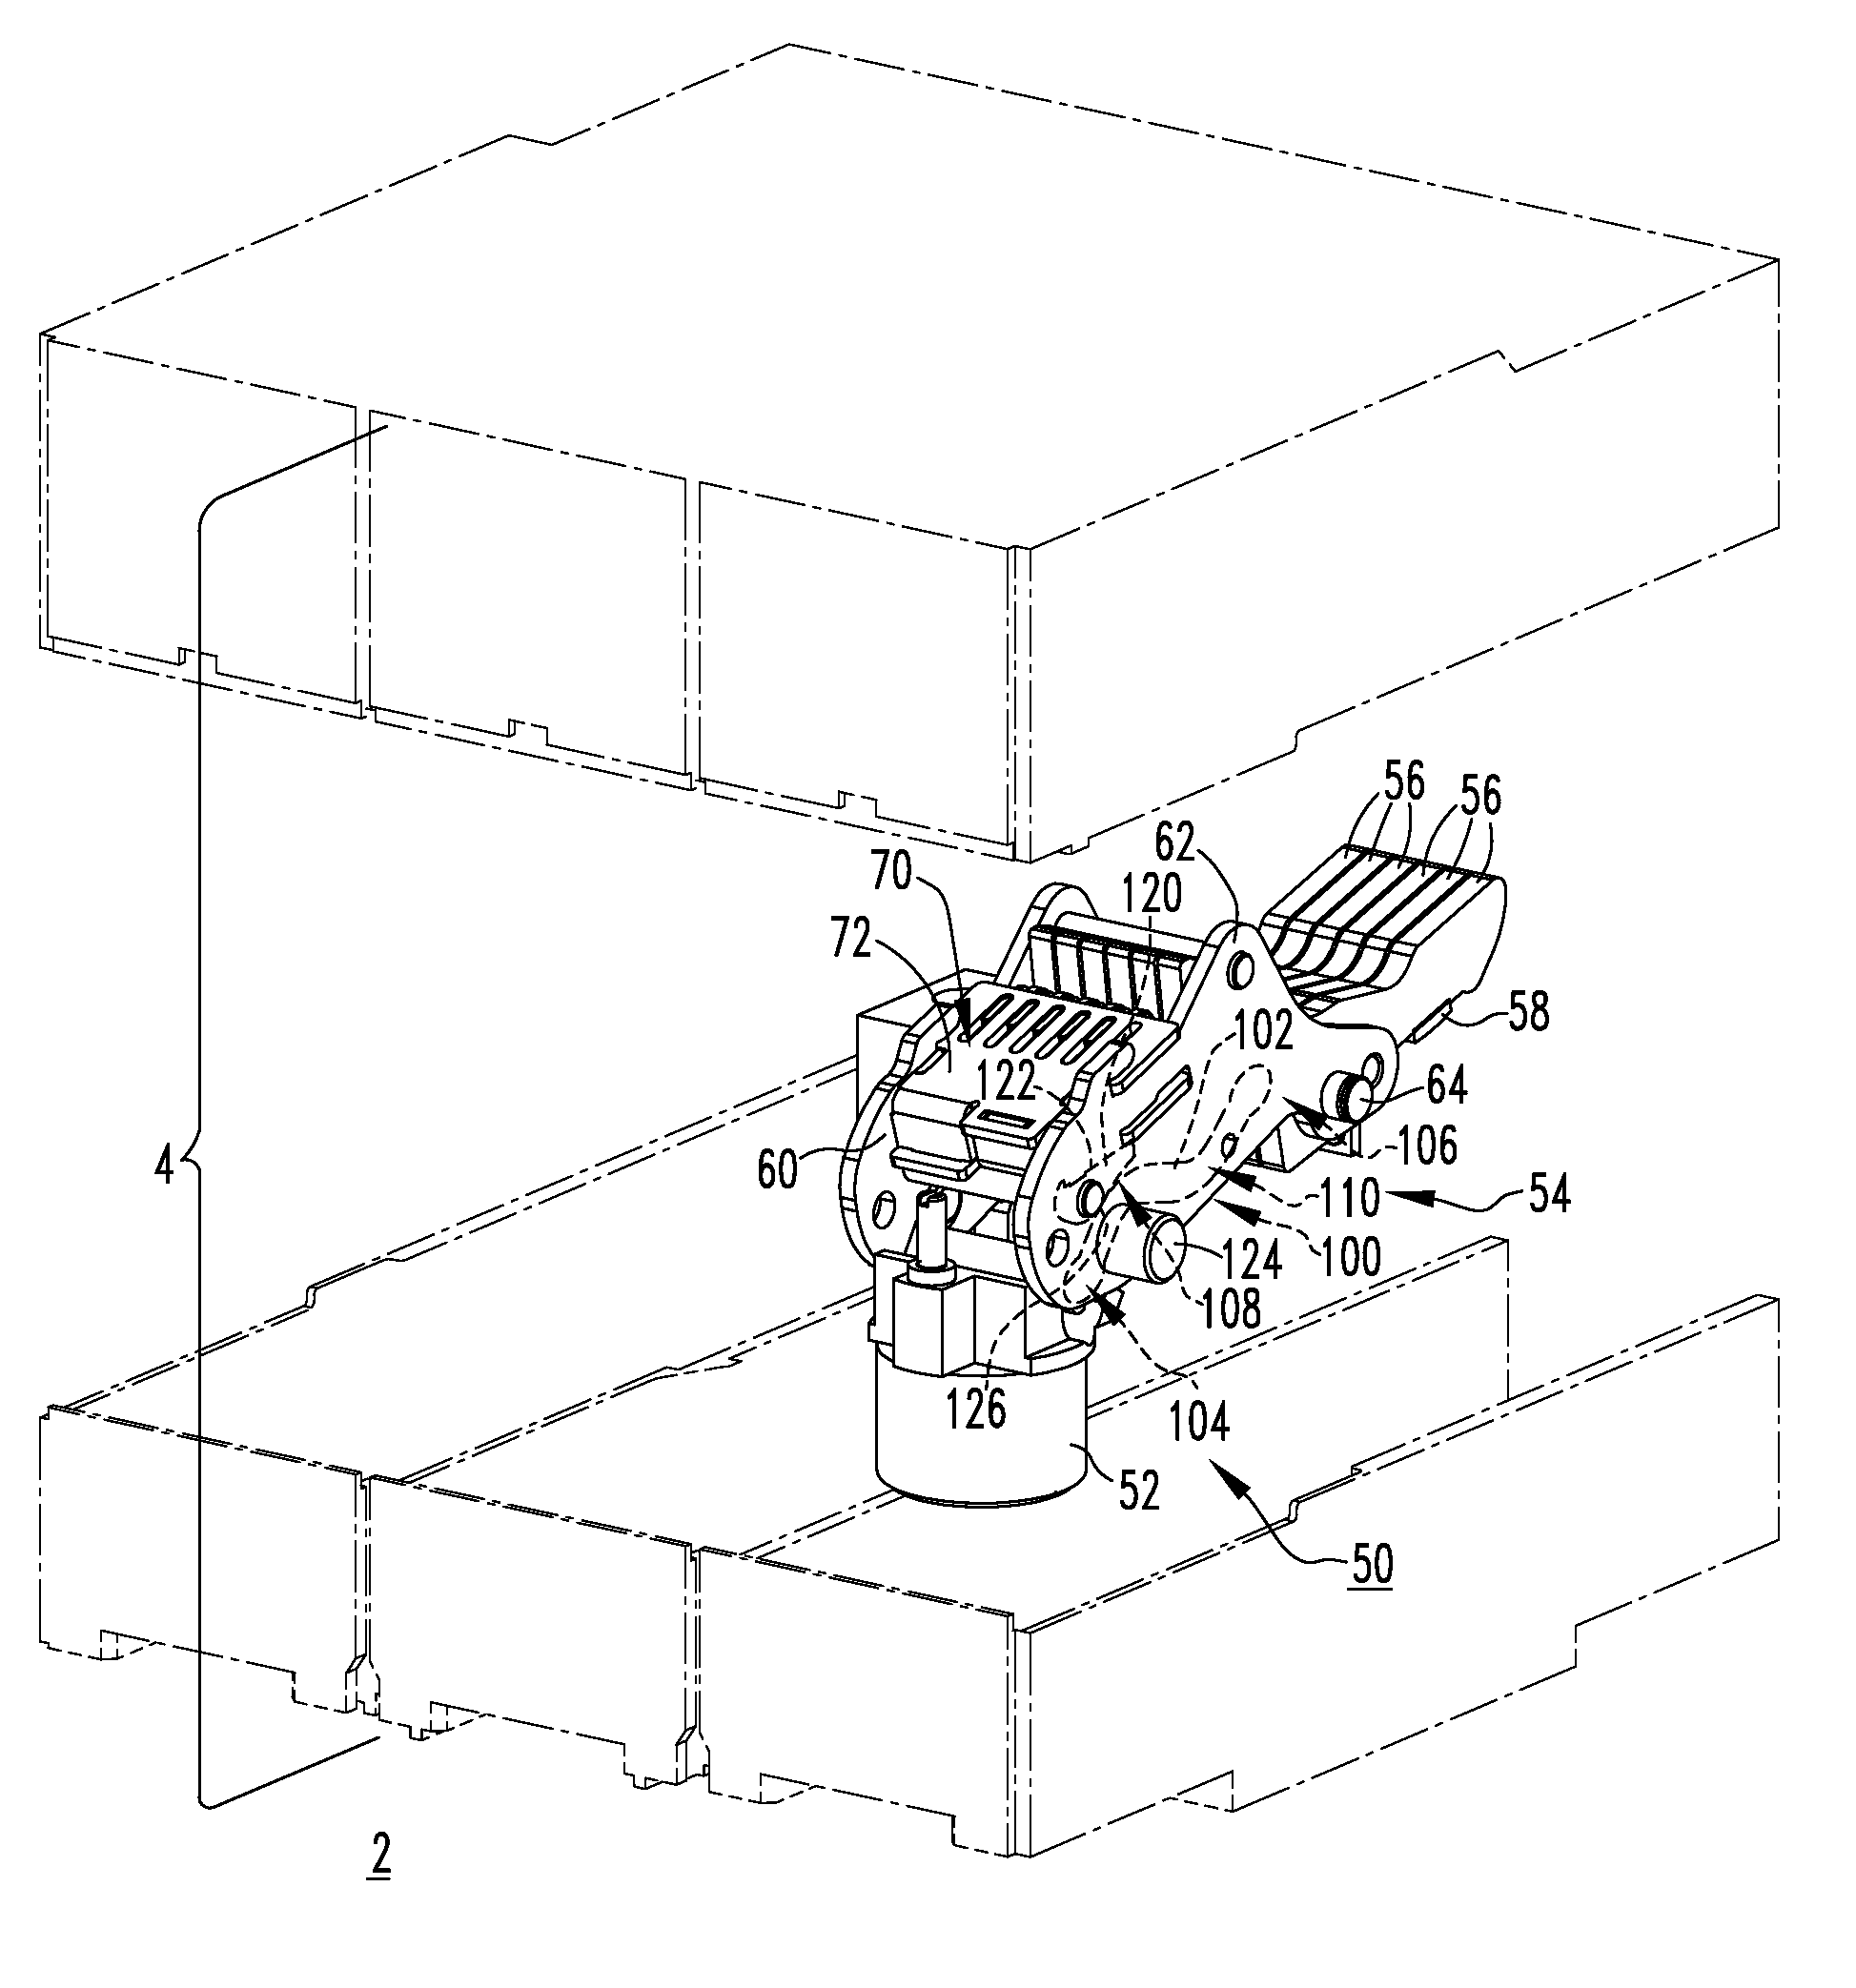 Electrical switching apparatus, and conductor assembly and shunt assembly therefor